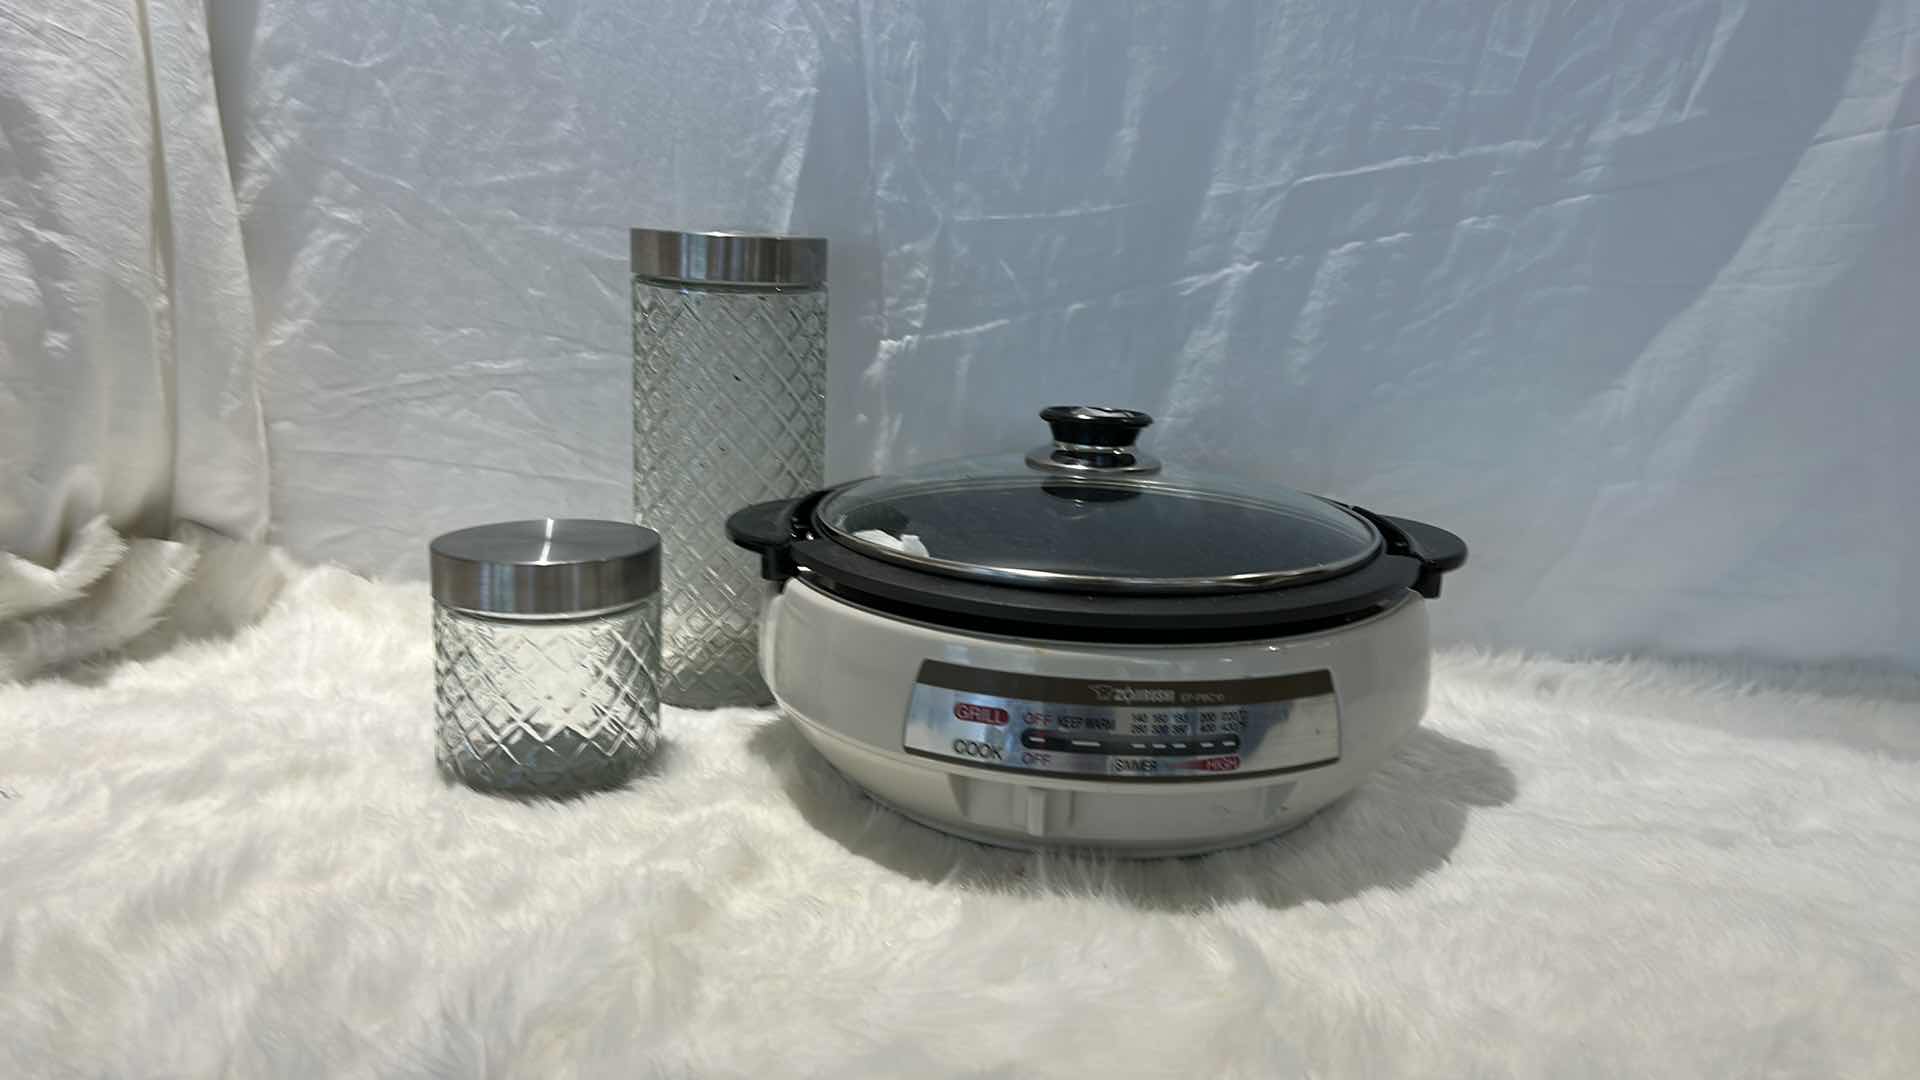 Photo 5 of KITCHEN ACCESSORIES - 2 GLASS CANISTERS AND ZOJIRUSHI GRILL